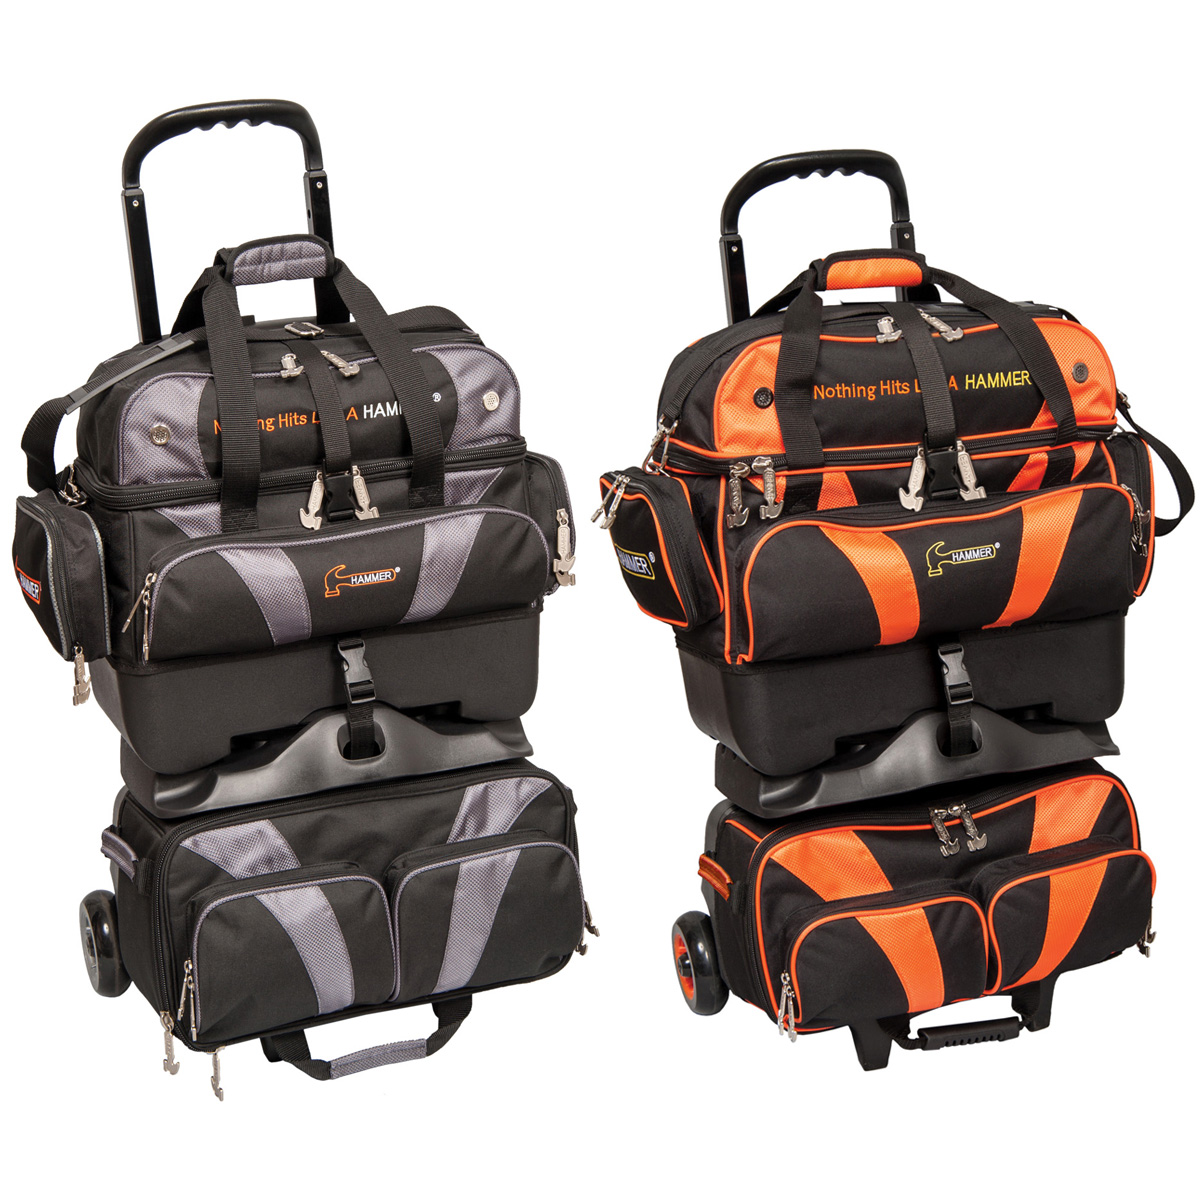 Maximize Your Performance with a 4-Ball Bowling Bag